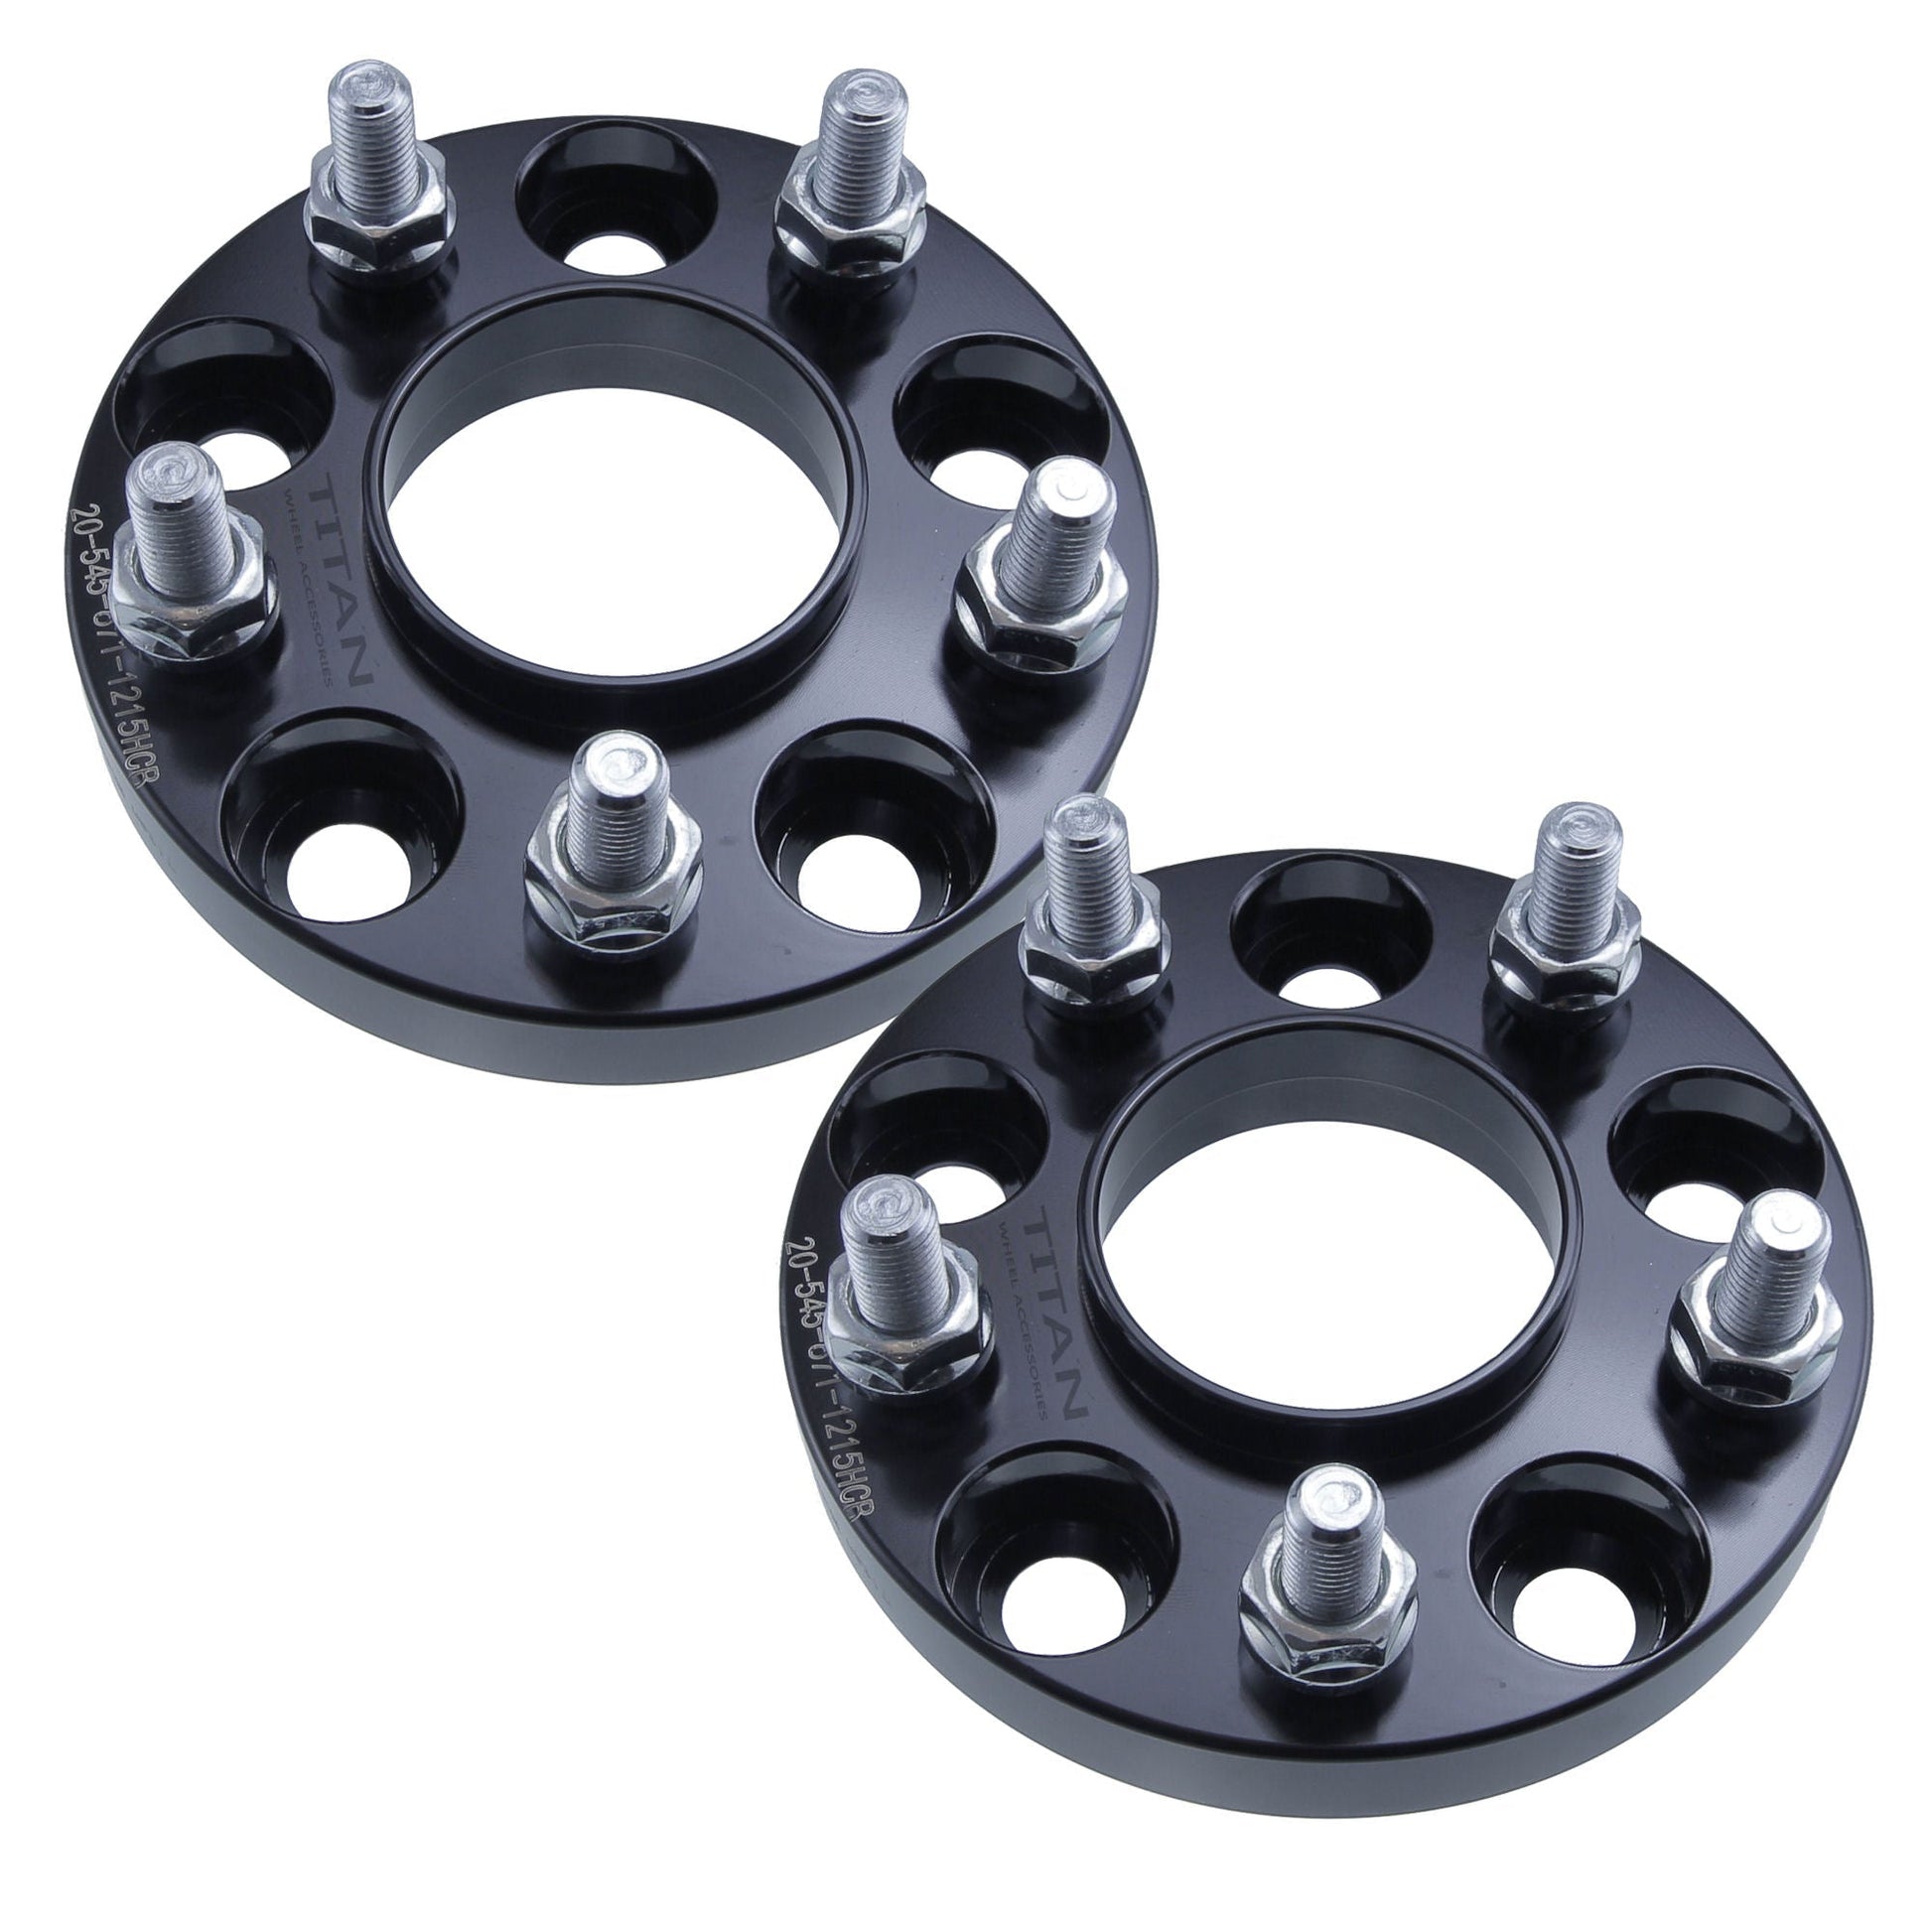 15mm Titan Wheel Spacers for Kia Vehicles Lincoln MKZ Zephyr | 5x114.3 (5x4.5) | 67.1 Hubcentric |12x1.25 Studs |  Set of 4 | Titan Wheel Accessories